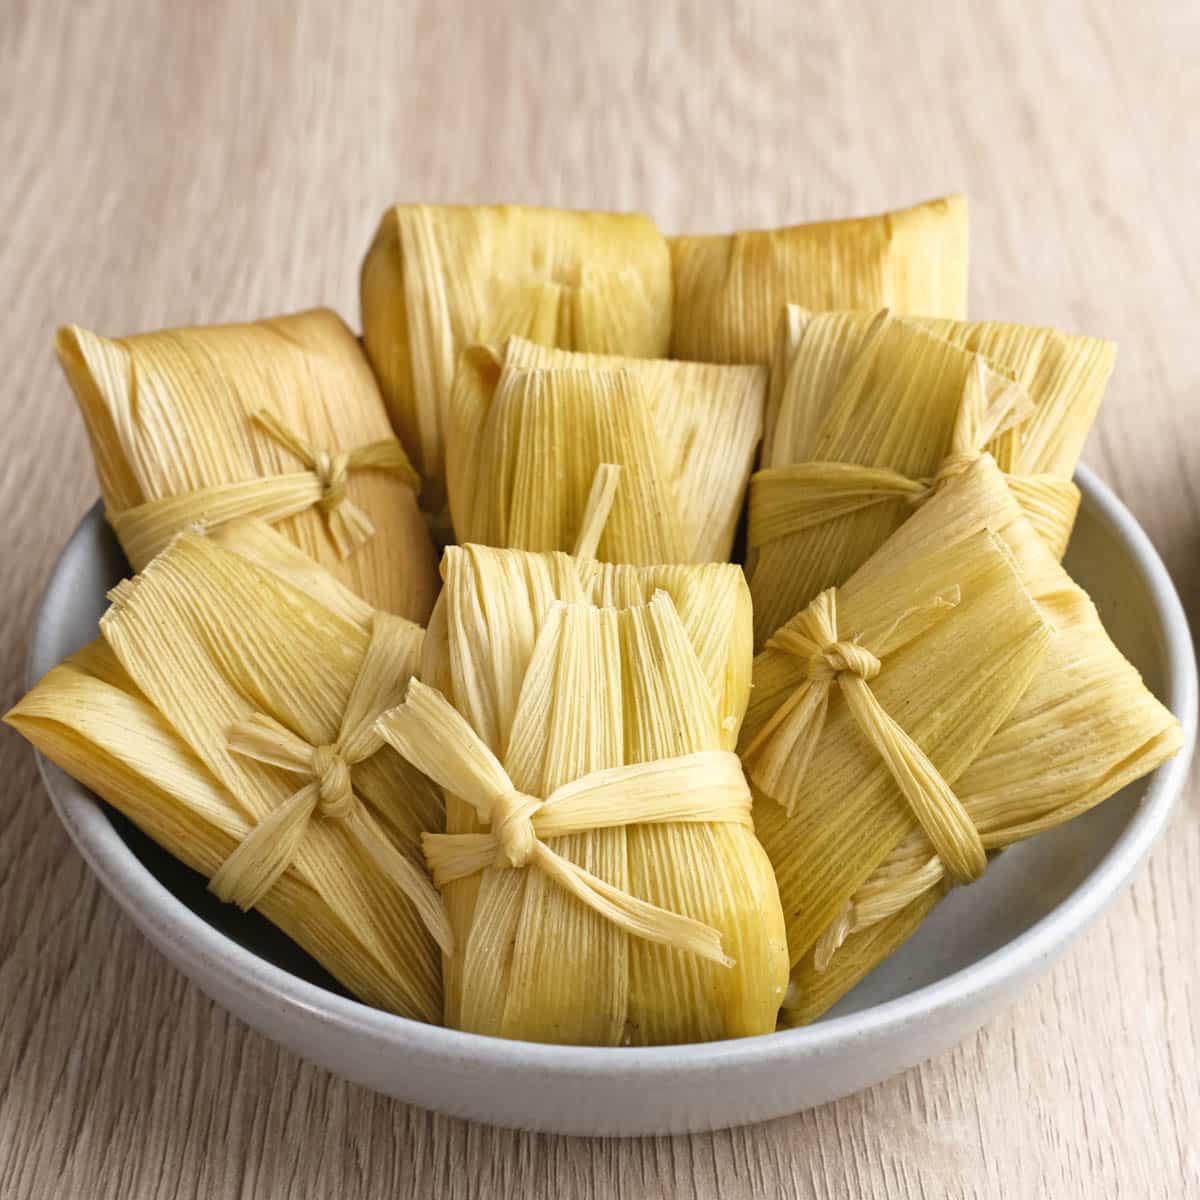 Bowl filled with tamales ready to be reheated.